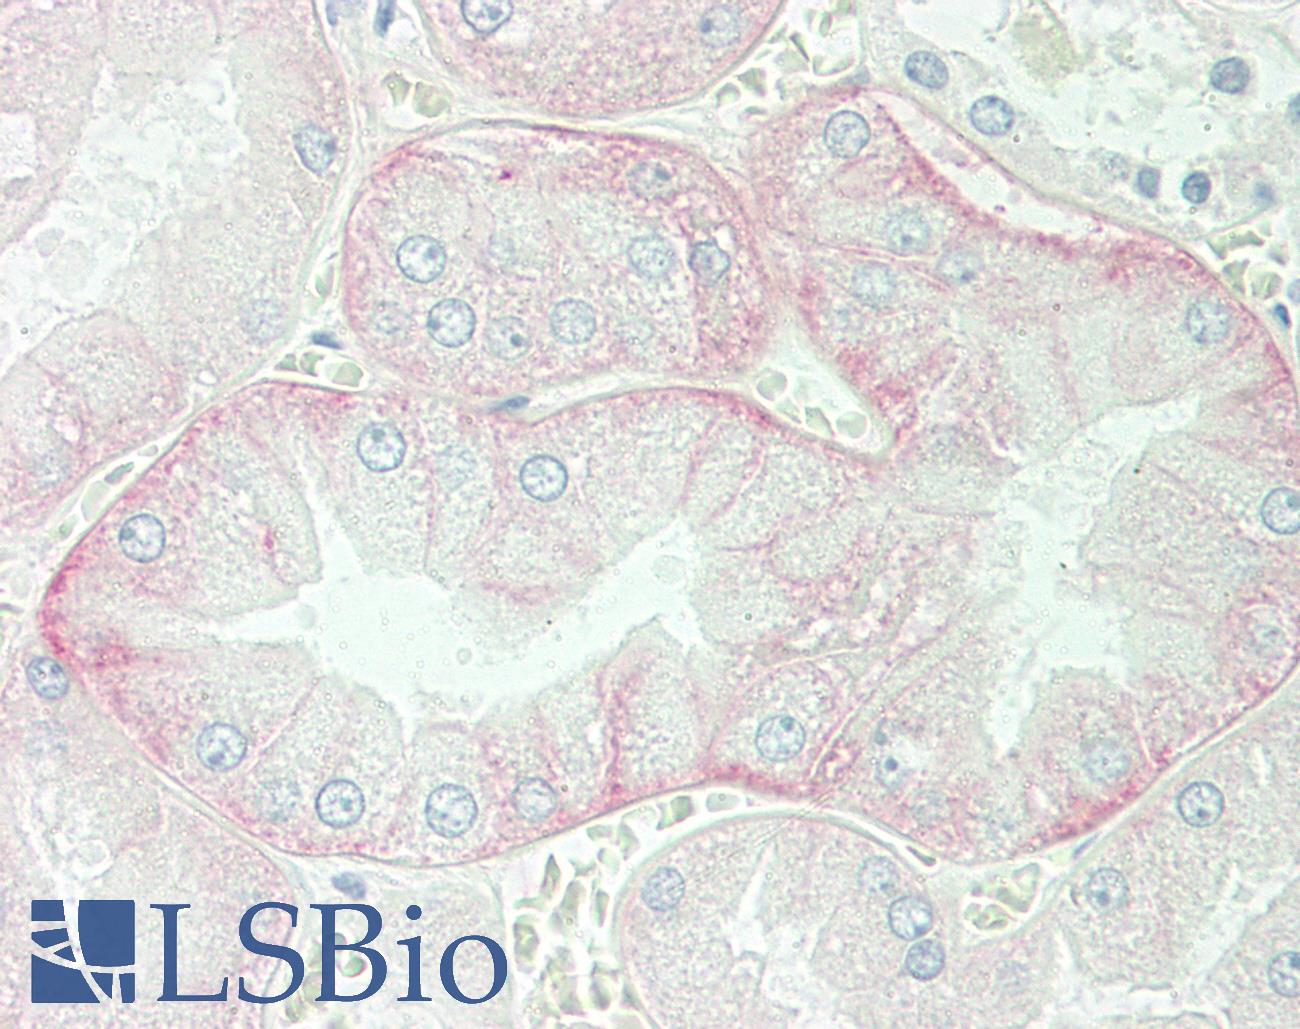 SLC3A2 / CD98 Heavy Chain Antibody - Anti-SLC3A2 / CD98 antibody IHC staining of human kidney. Immunohistochemistry of formalin-fixed, paraffin-embedded tissue after heat-induced antigen retrieval.